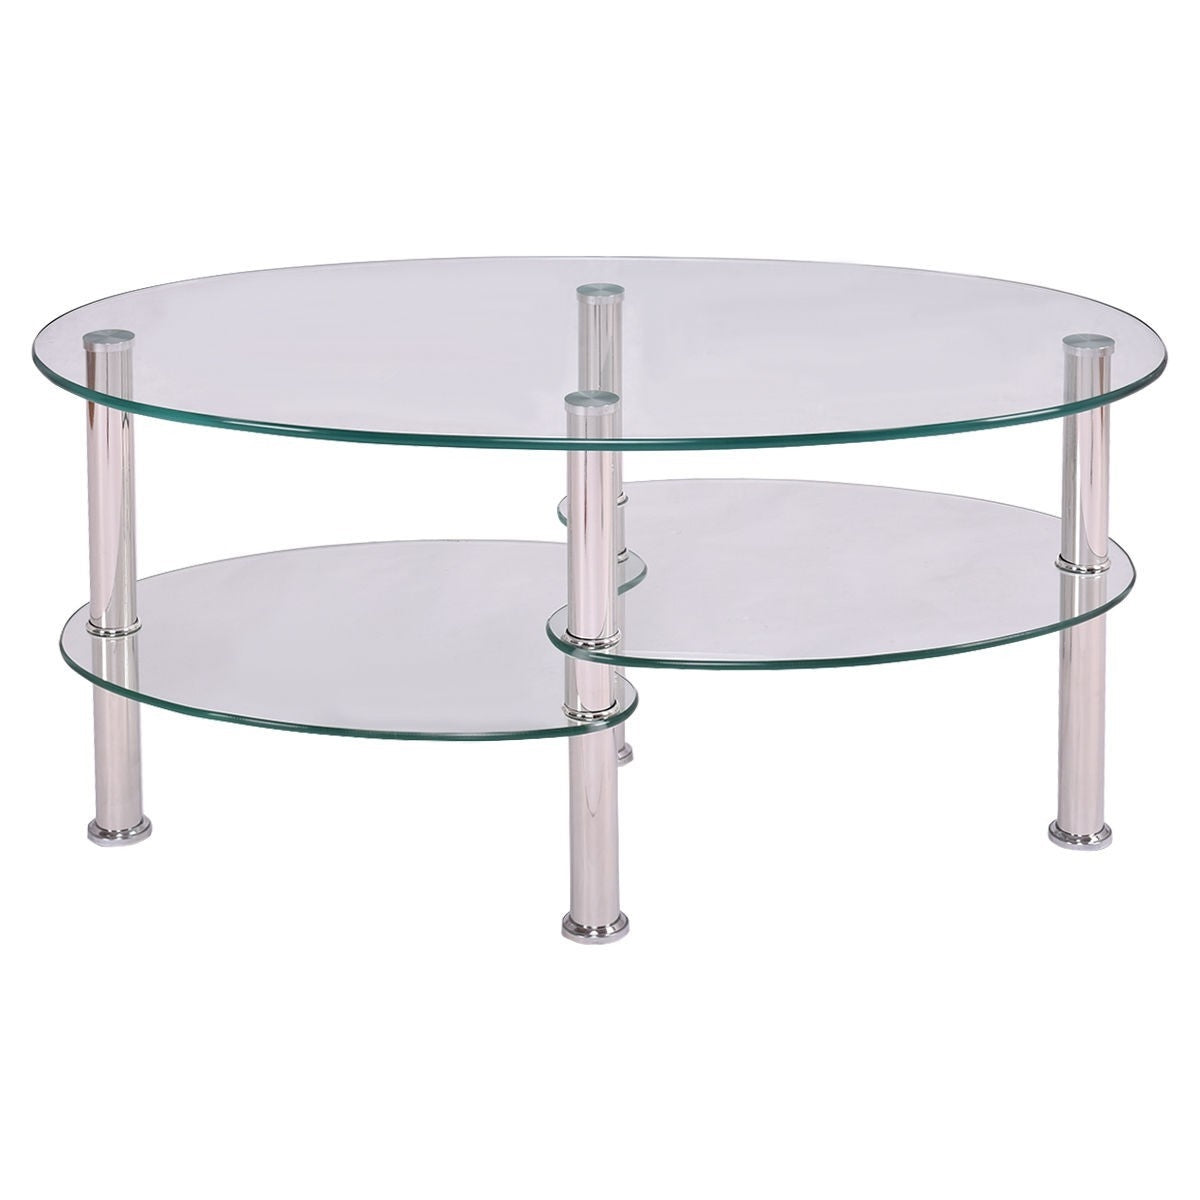 Modern Oval Tempered Glass Coffee Table with Bottom Shelf